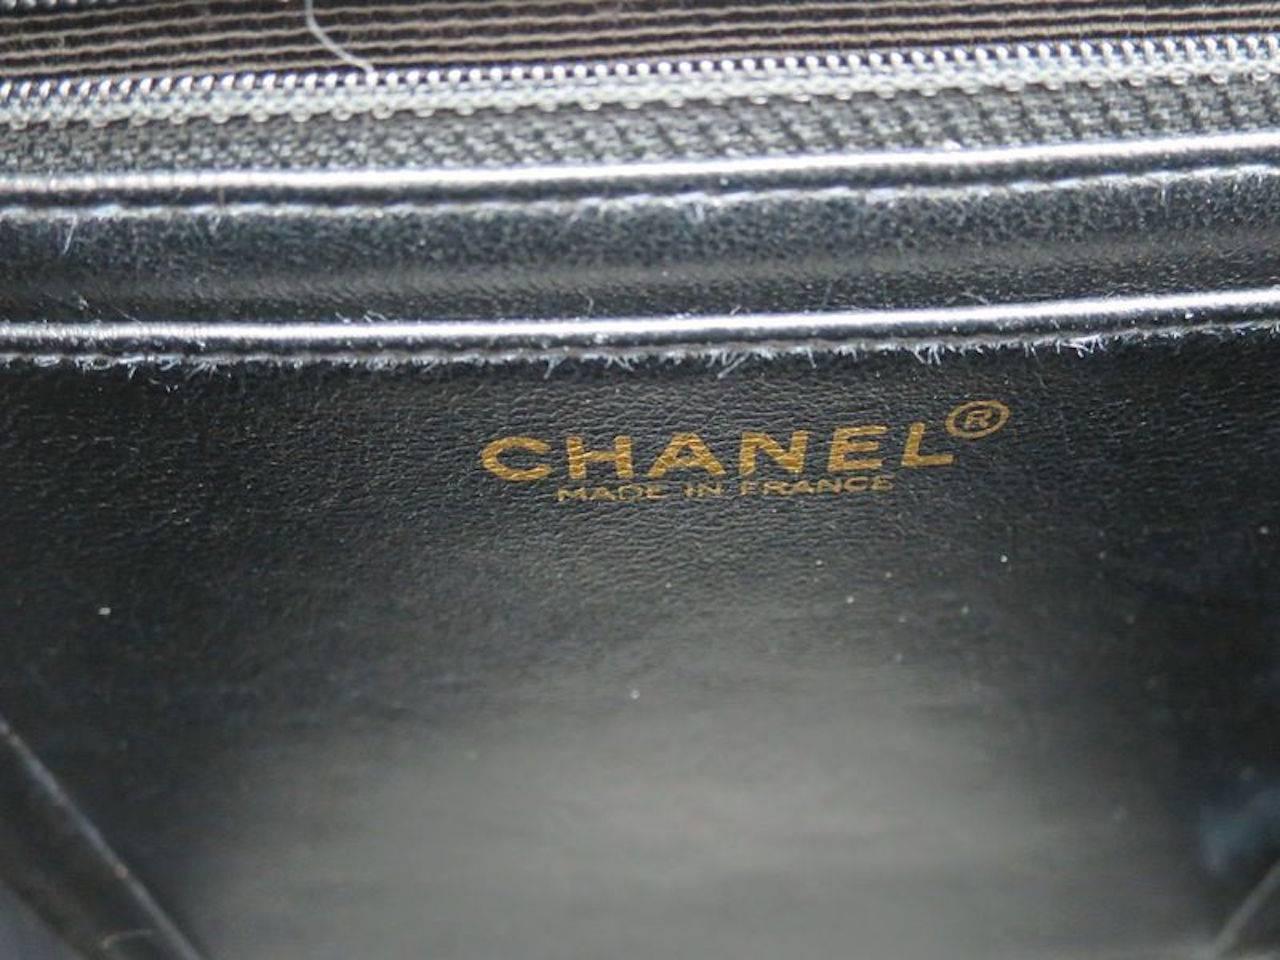 Chanel Black Caviar Leather Gold Kelly Style Box Top Handle Satchel Bag in Box 2